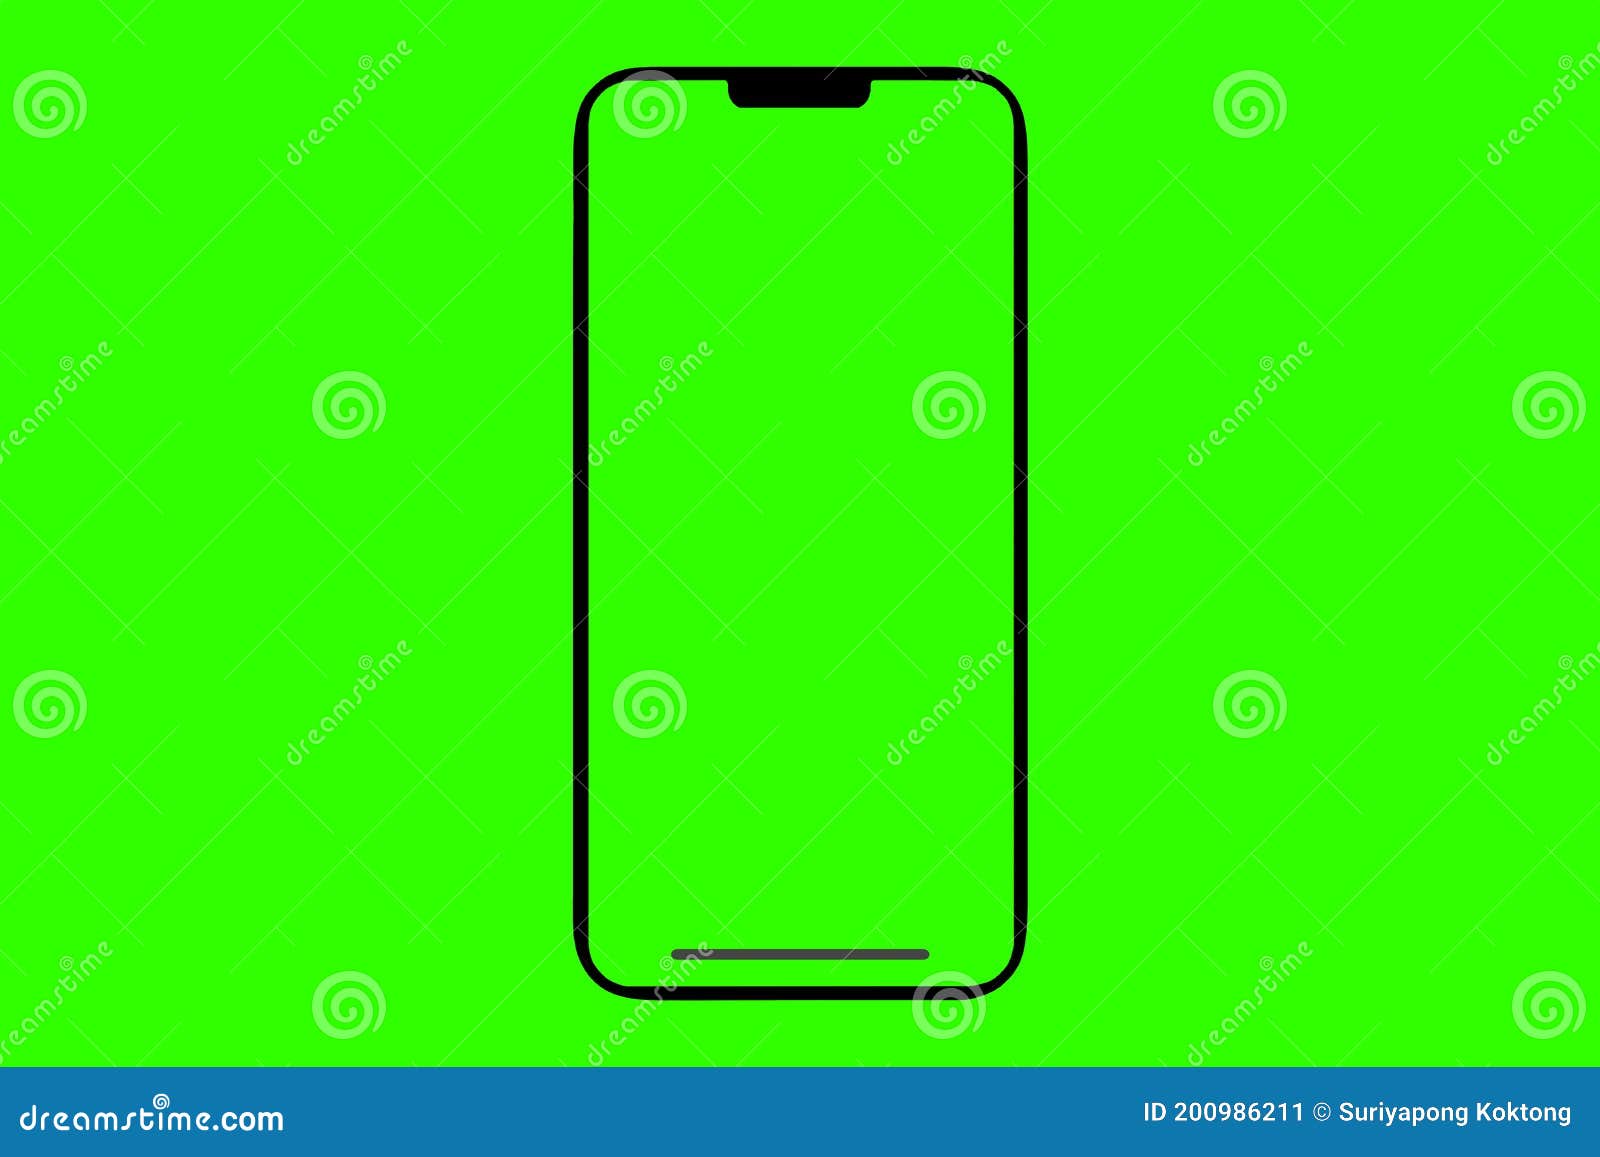 modern mobile smart phone with blank green screen.